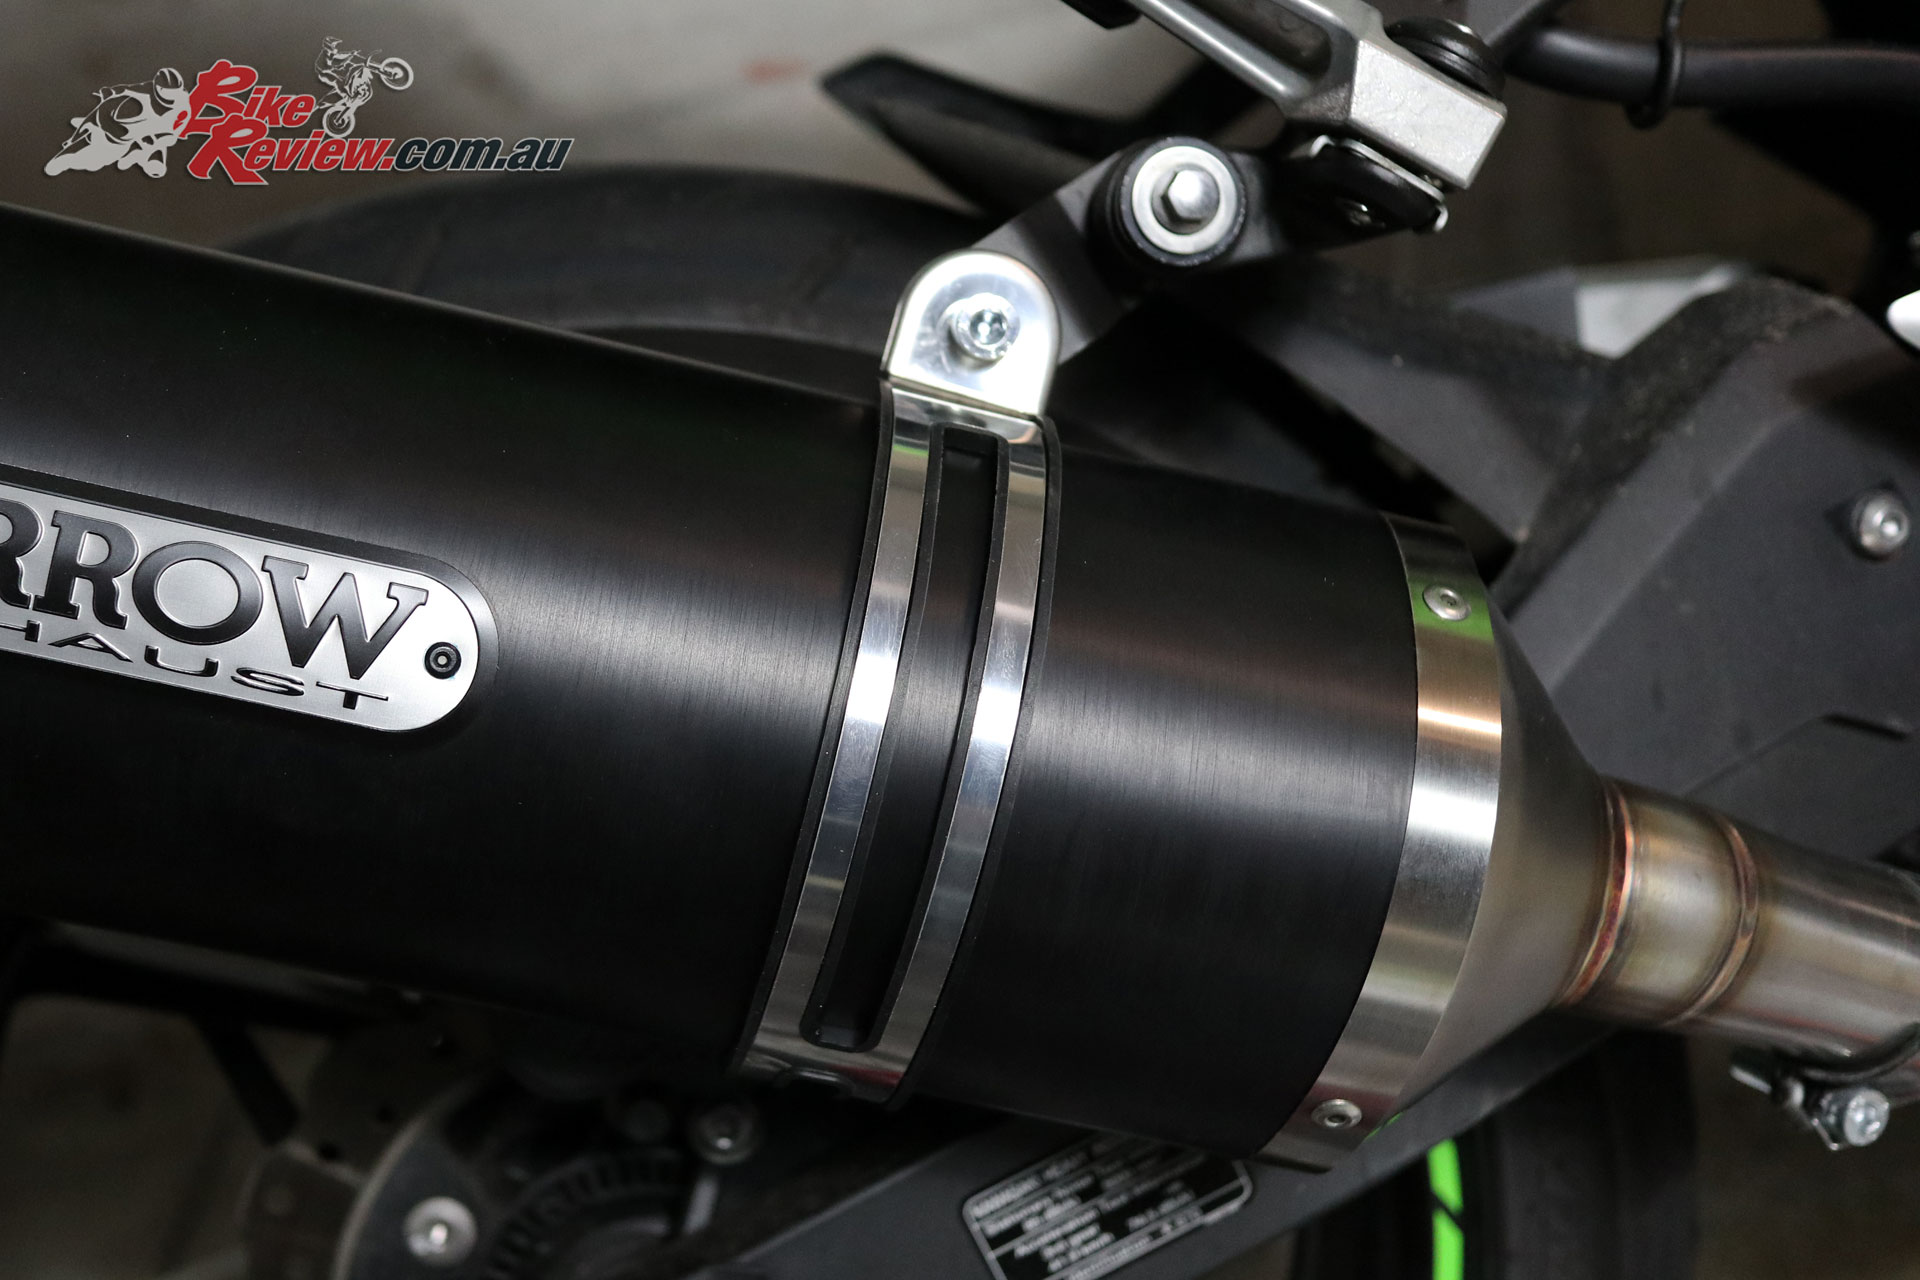 See here the black bracket mounted to the pillion peg hanger, as well as the exhaust clamp